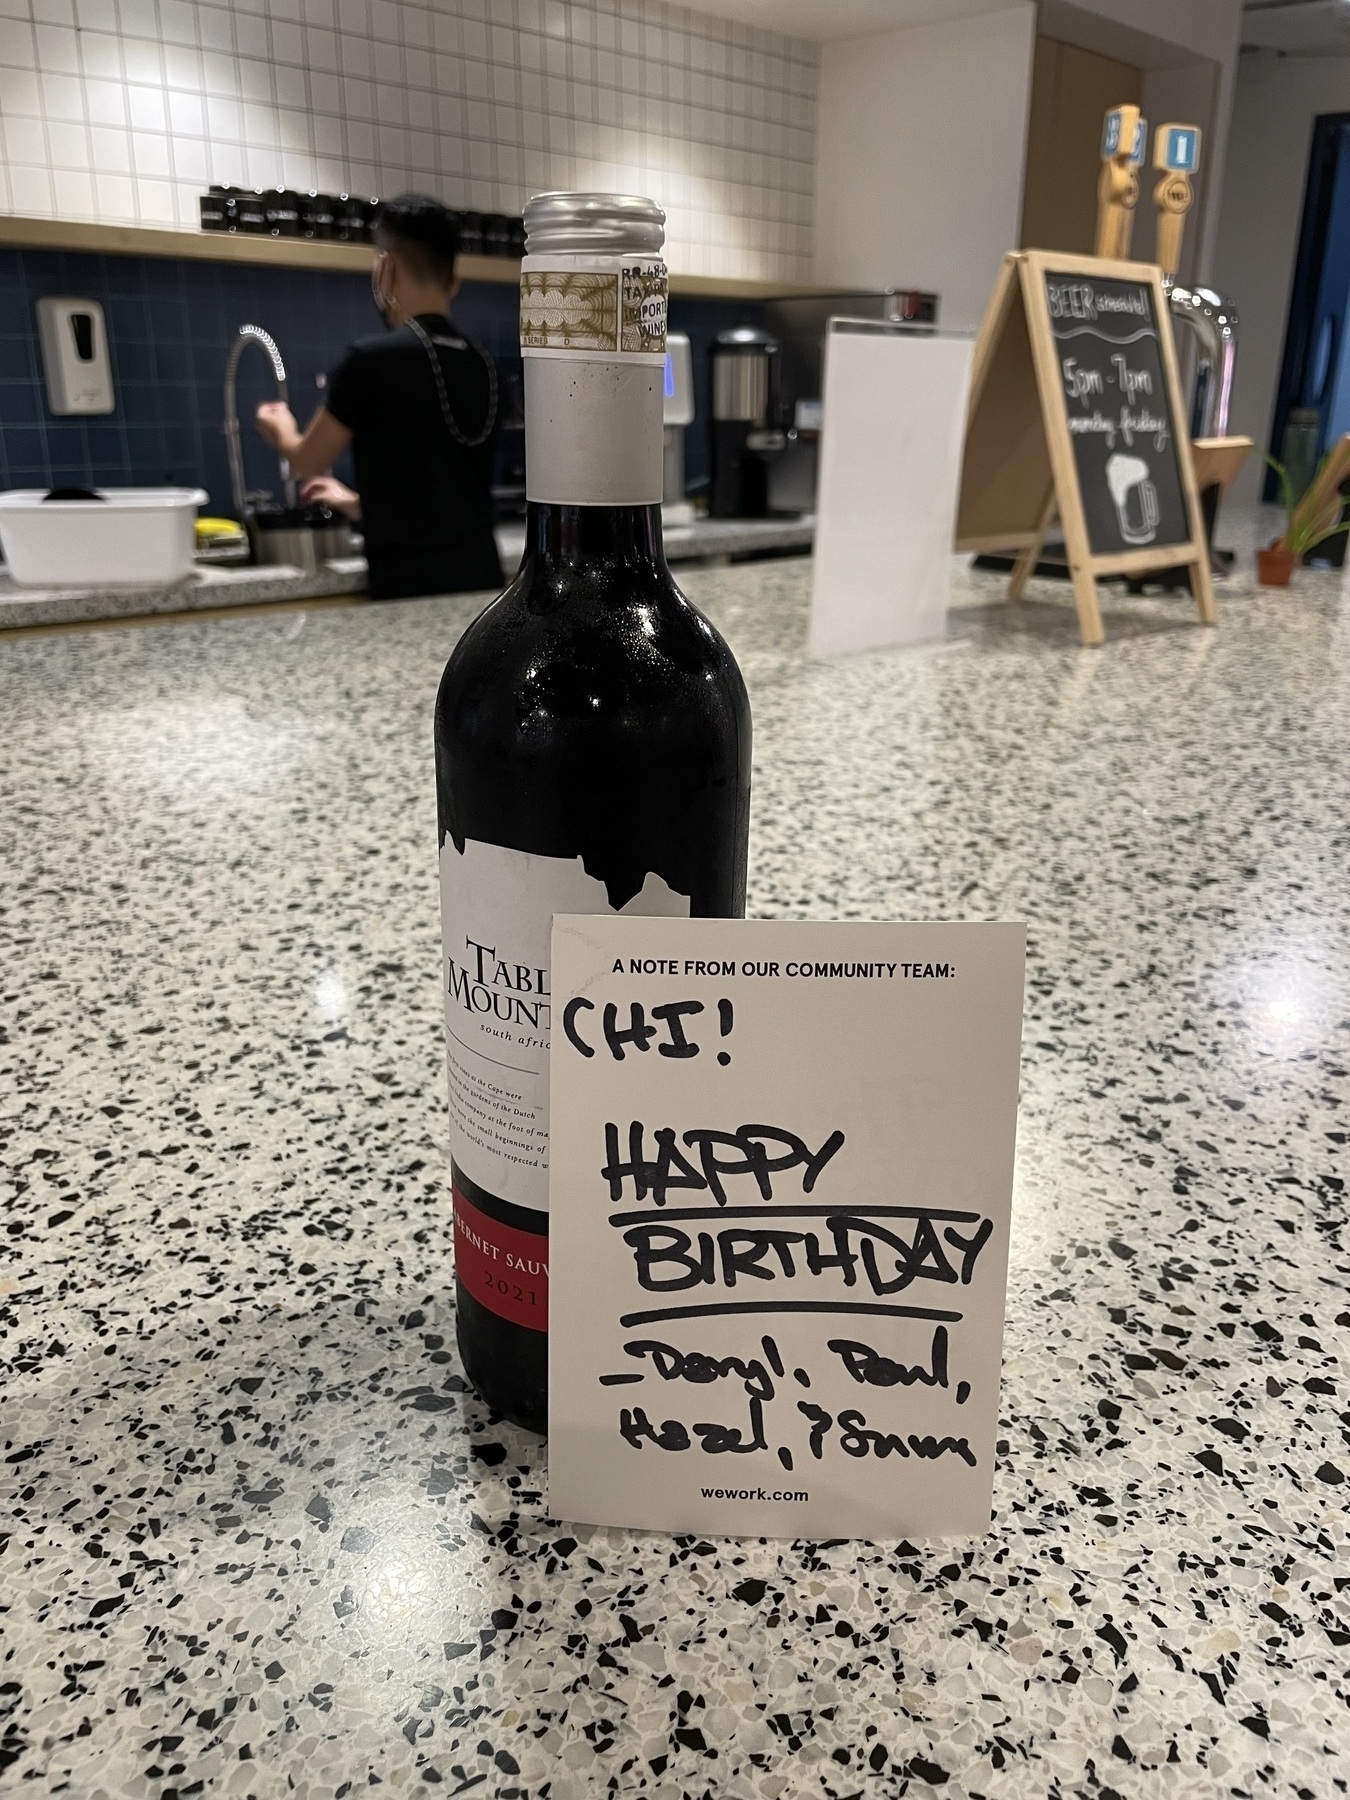 A wine bottle is on a marbled countertop with a greeting card in front of it. The text reads, "A note from our community team: Chi! Happy birthday Daryl, Paul, Hazel, & Sumana"